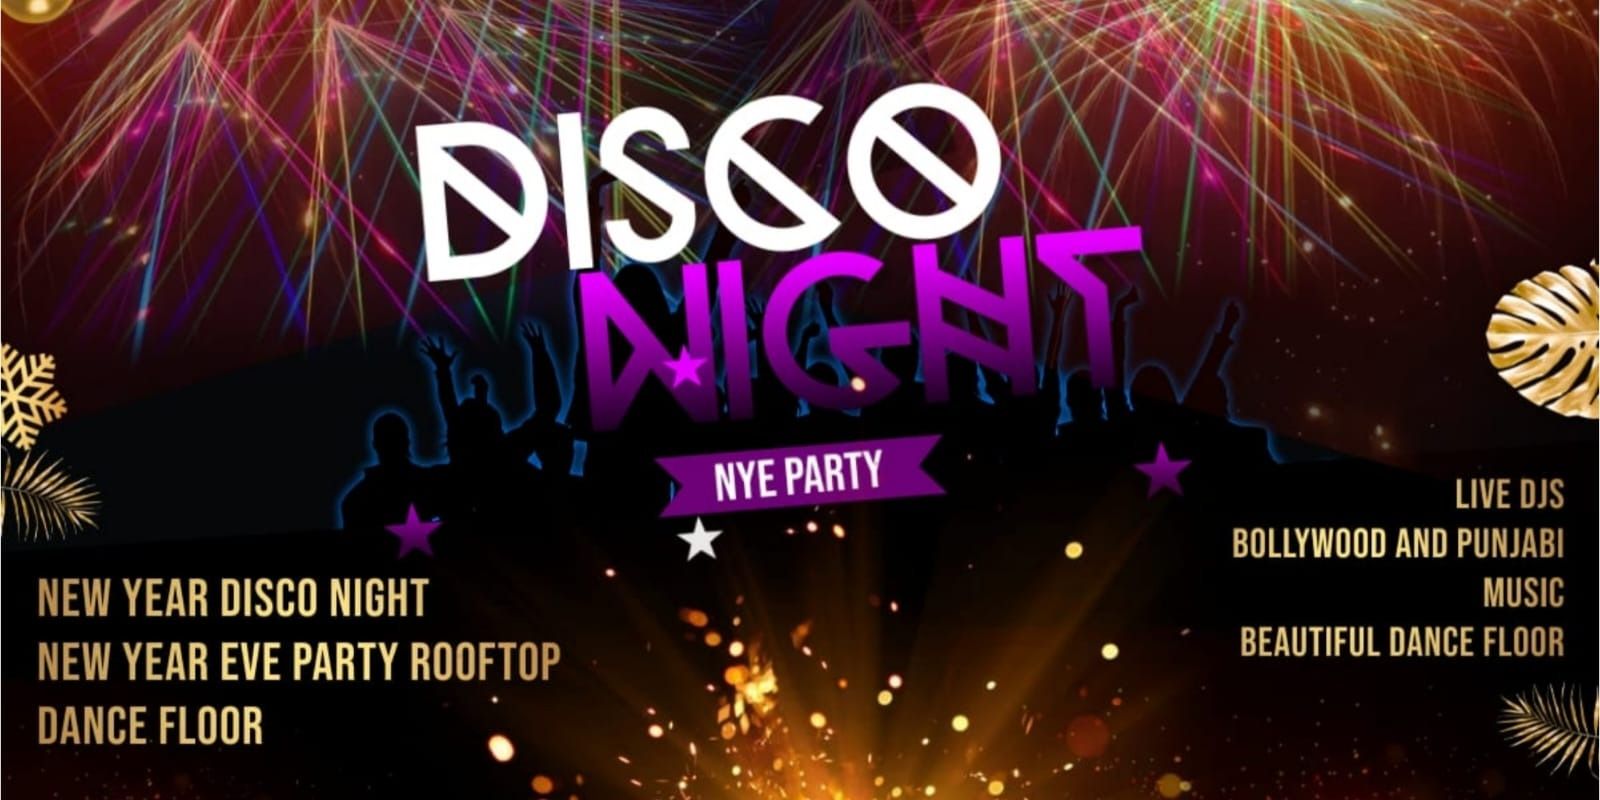 DISCO NIGHT NEW YEAR EVE PARTY